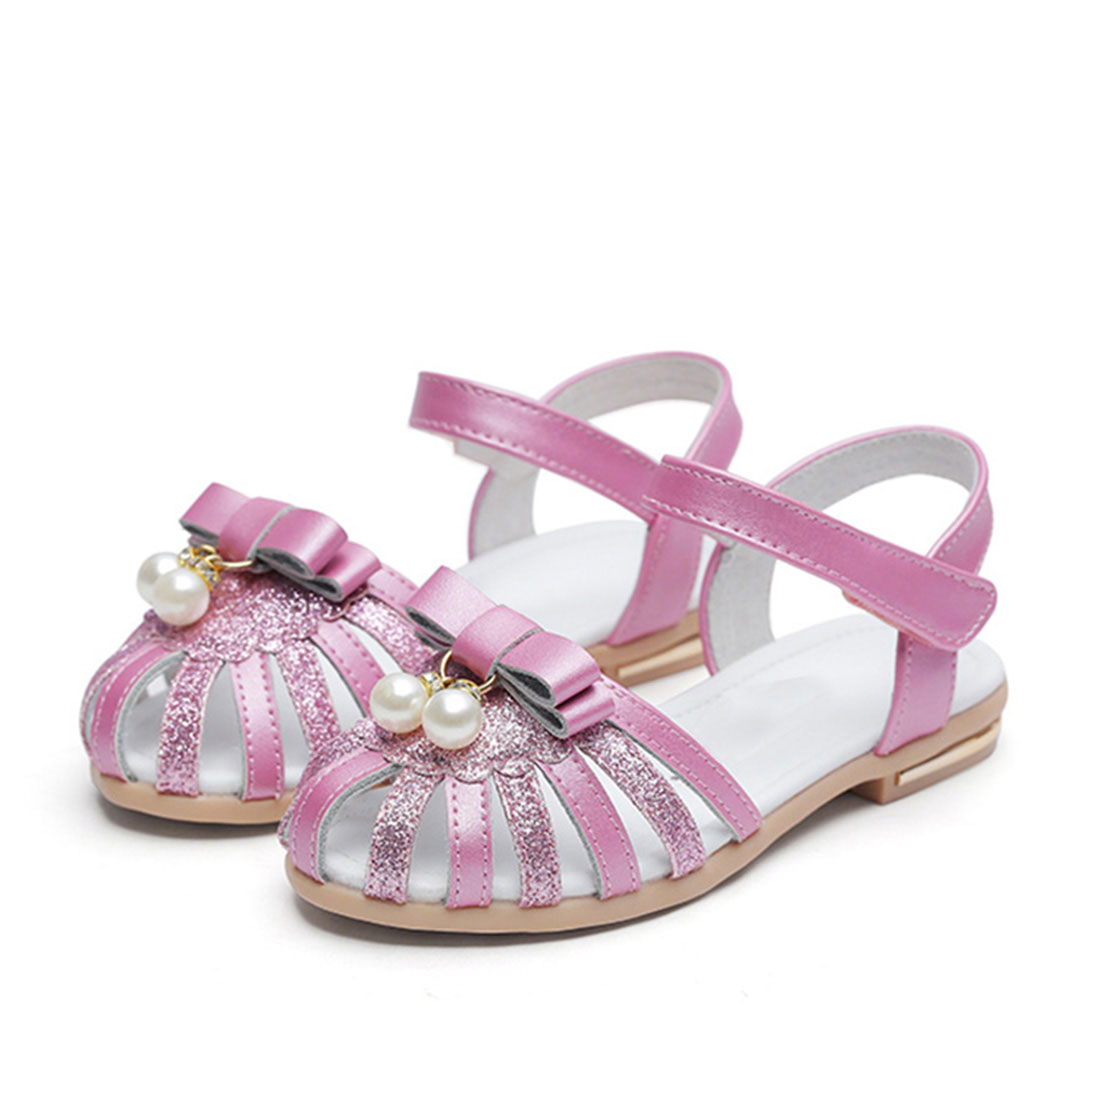 Leather and grittier gold flat dress summer design for kids sandals ...